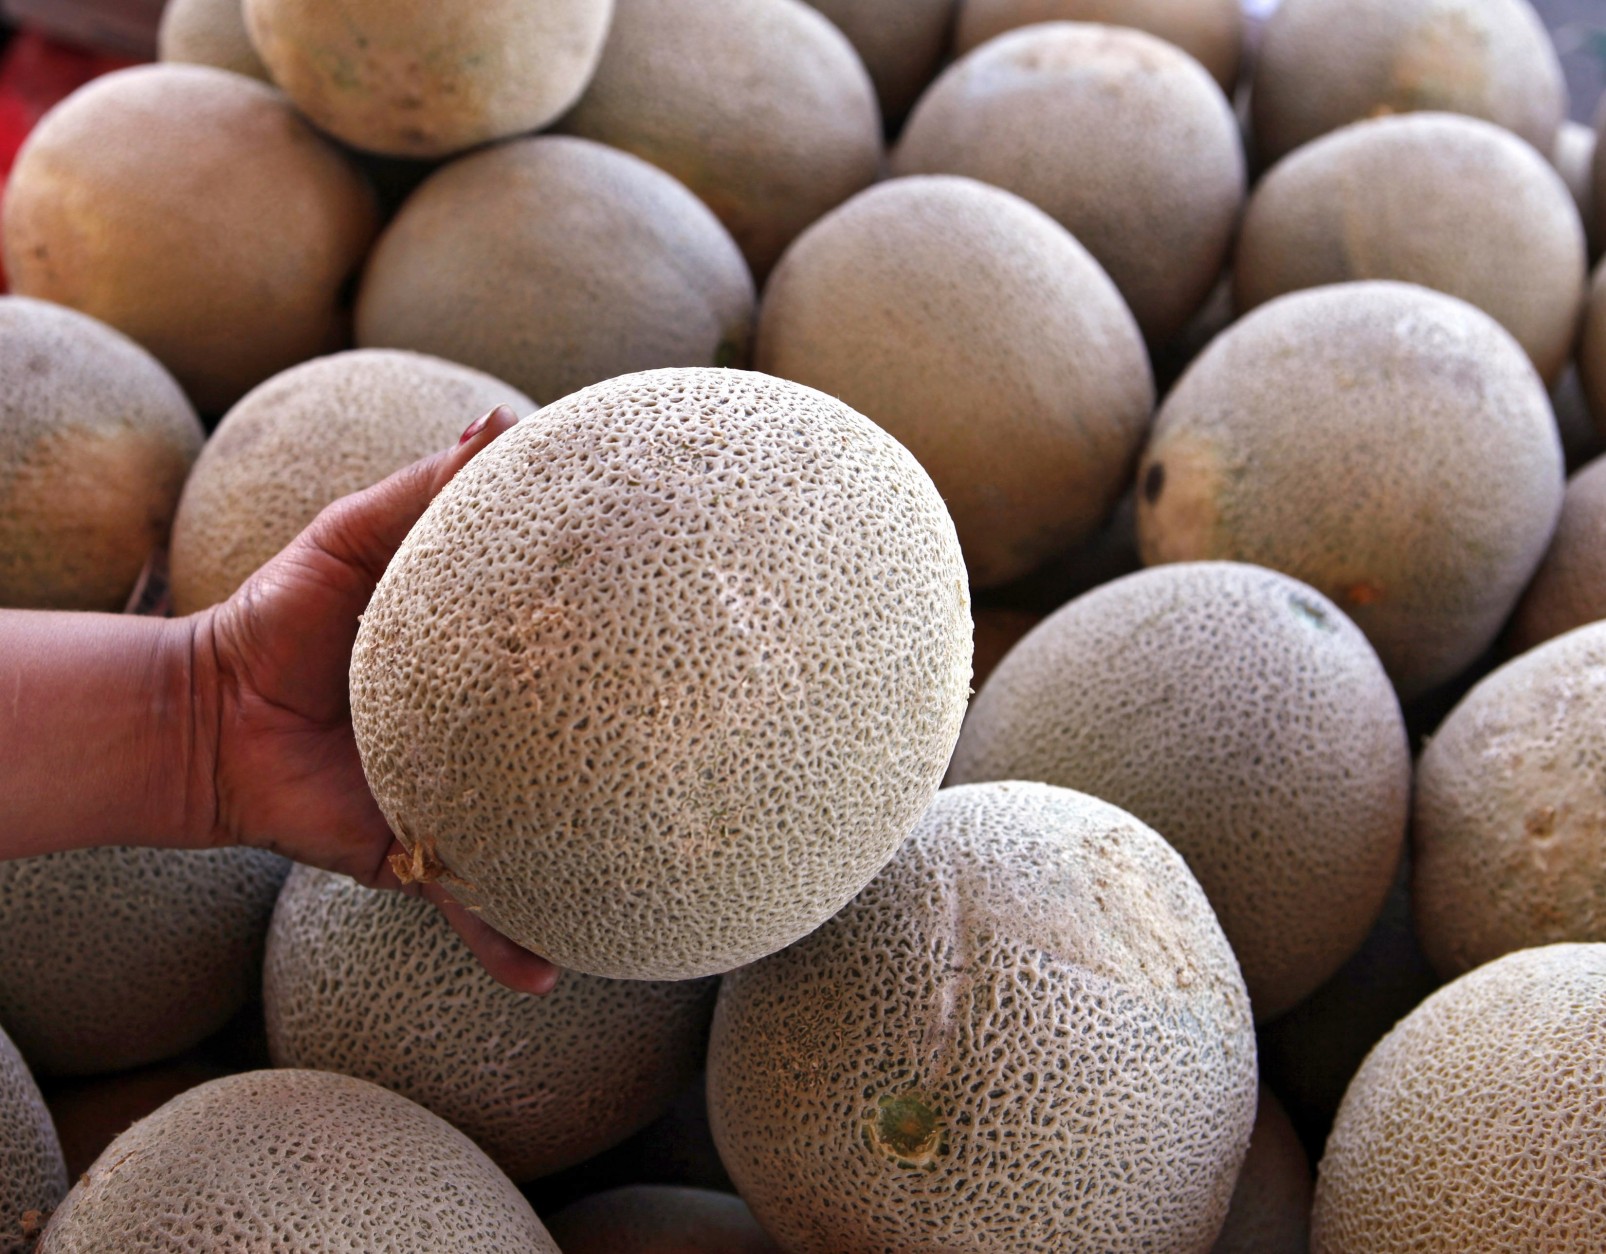 File - In this file photo, an operator of a fruit and vegetable stand holds a California-grown cantaloupe for sale at her business. (AP Photo/Ed Andrieski, file)